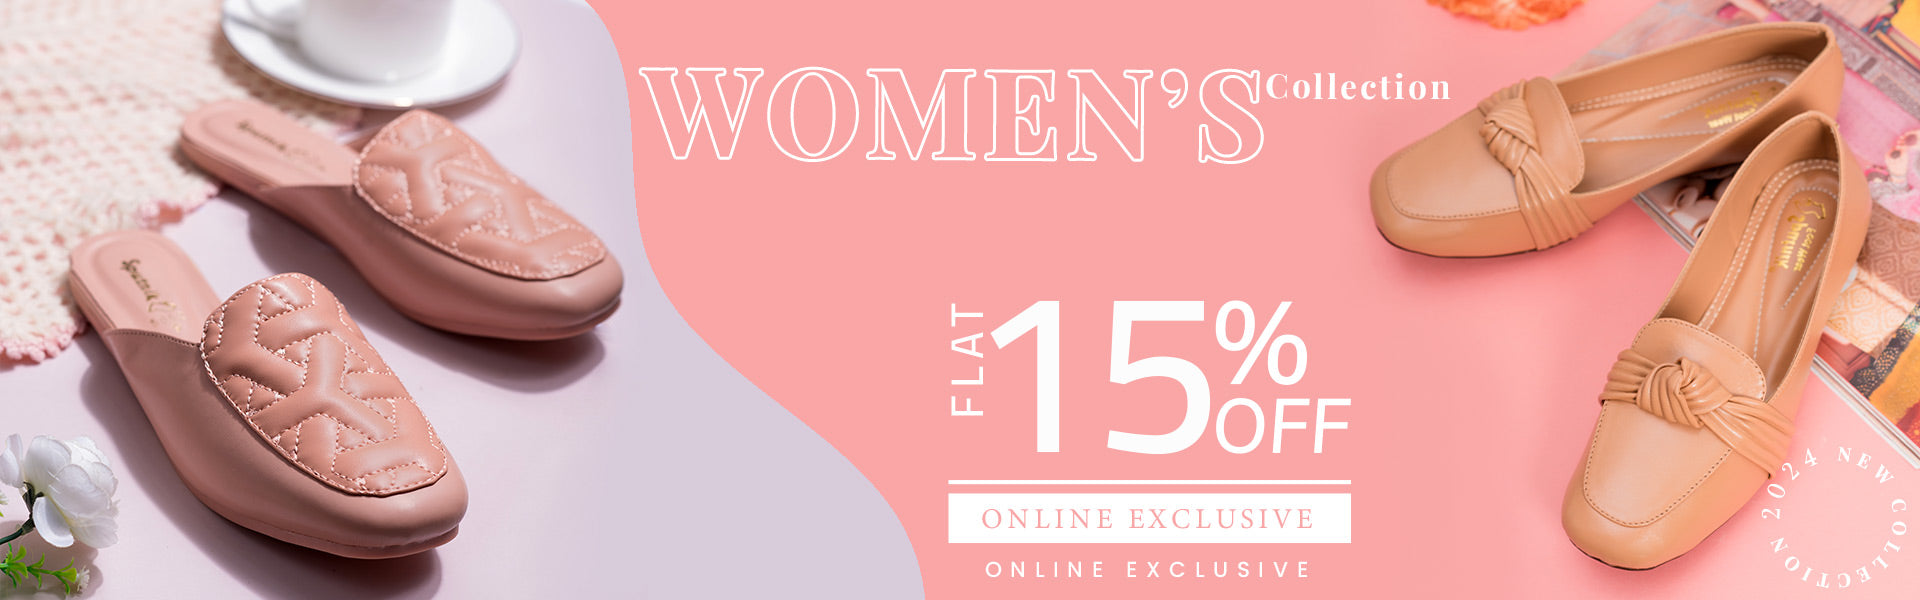 Women's Shoes - Shop the Collection Online Now